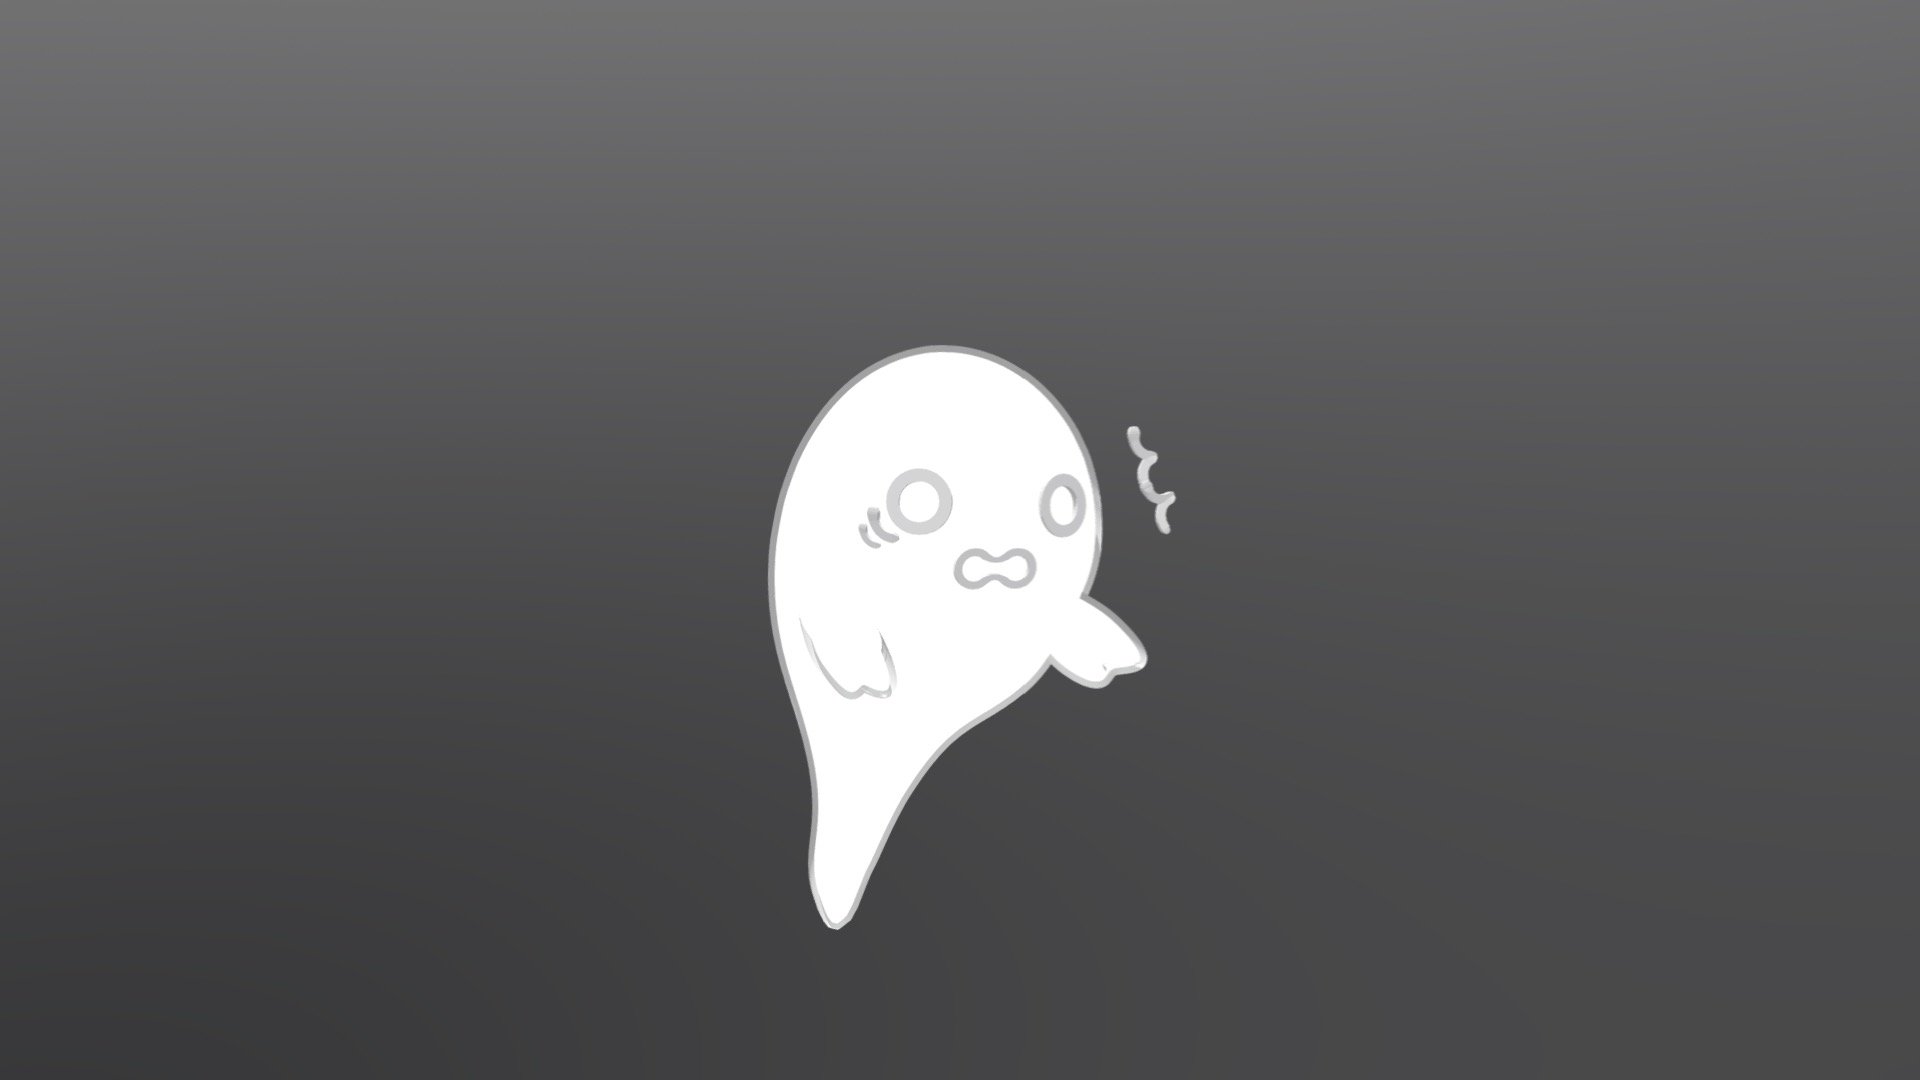 Boo! its spooky month, you'&lsquo;ll be frightened by this scared ghost! But don't worry it wont hurt you! - Scared Ghost 3d model